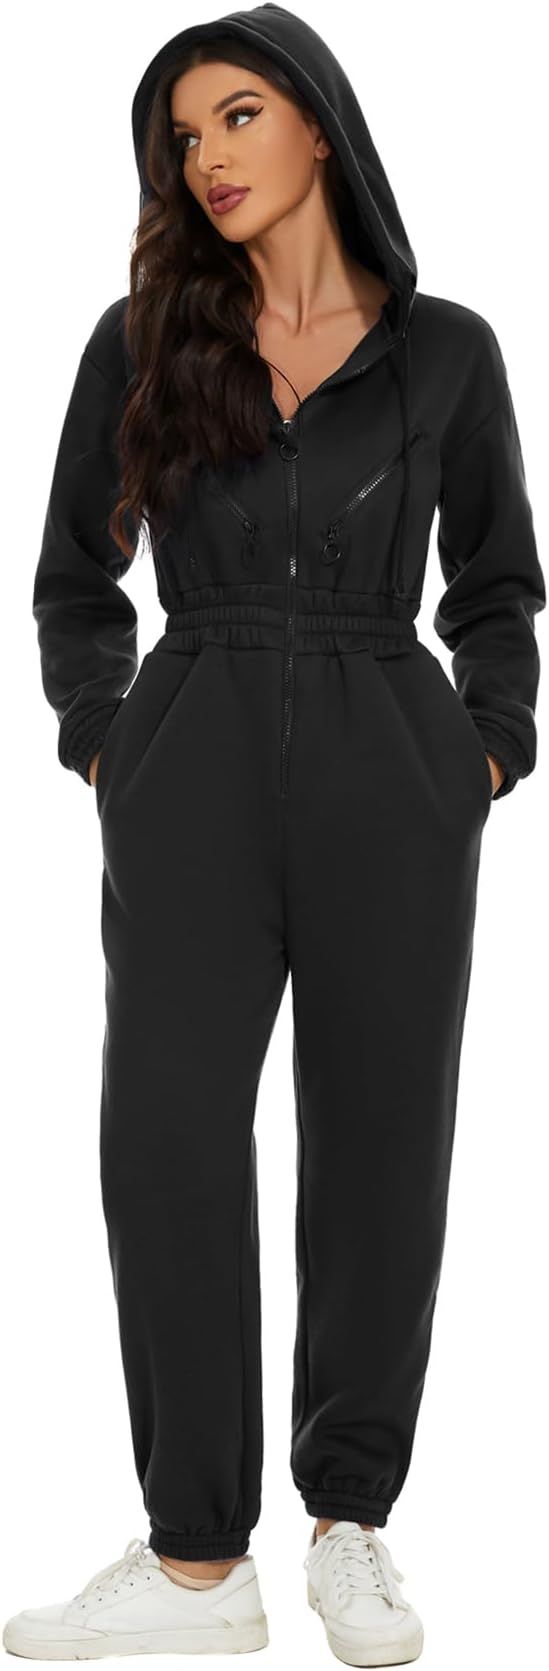 COZYPOIN Womens Fleece Jumpsuits One Piece Outfits Tracksuit Onesies Hoodie Romper Jumpers Set | Amazon (US)